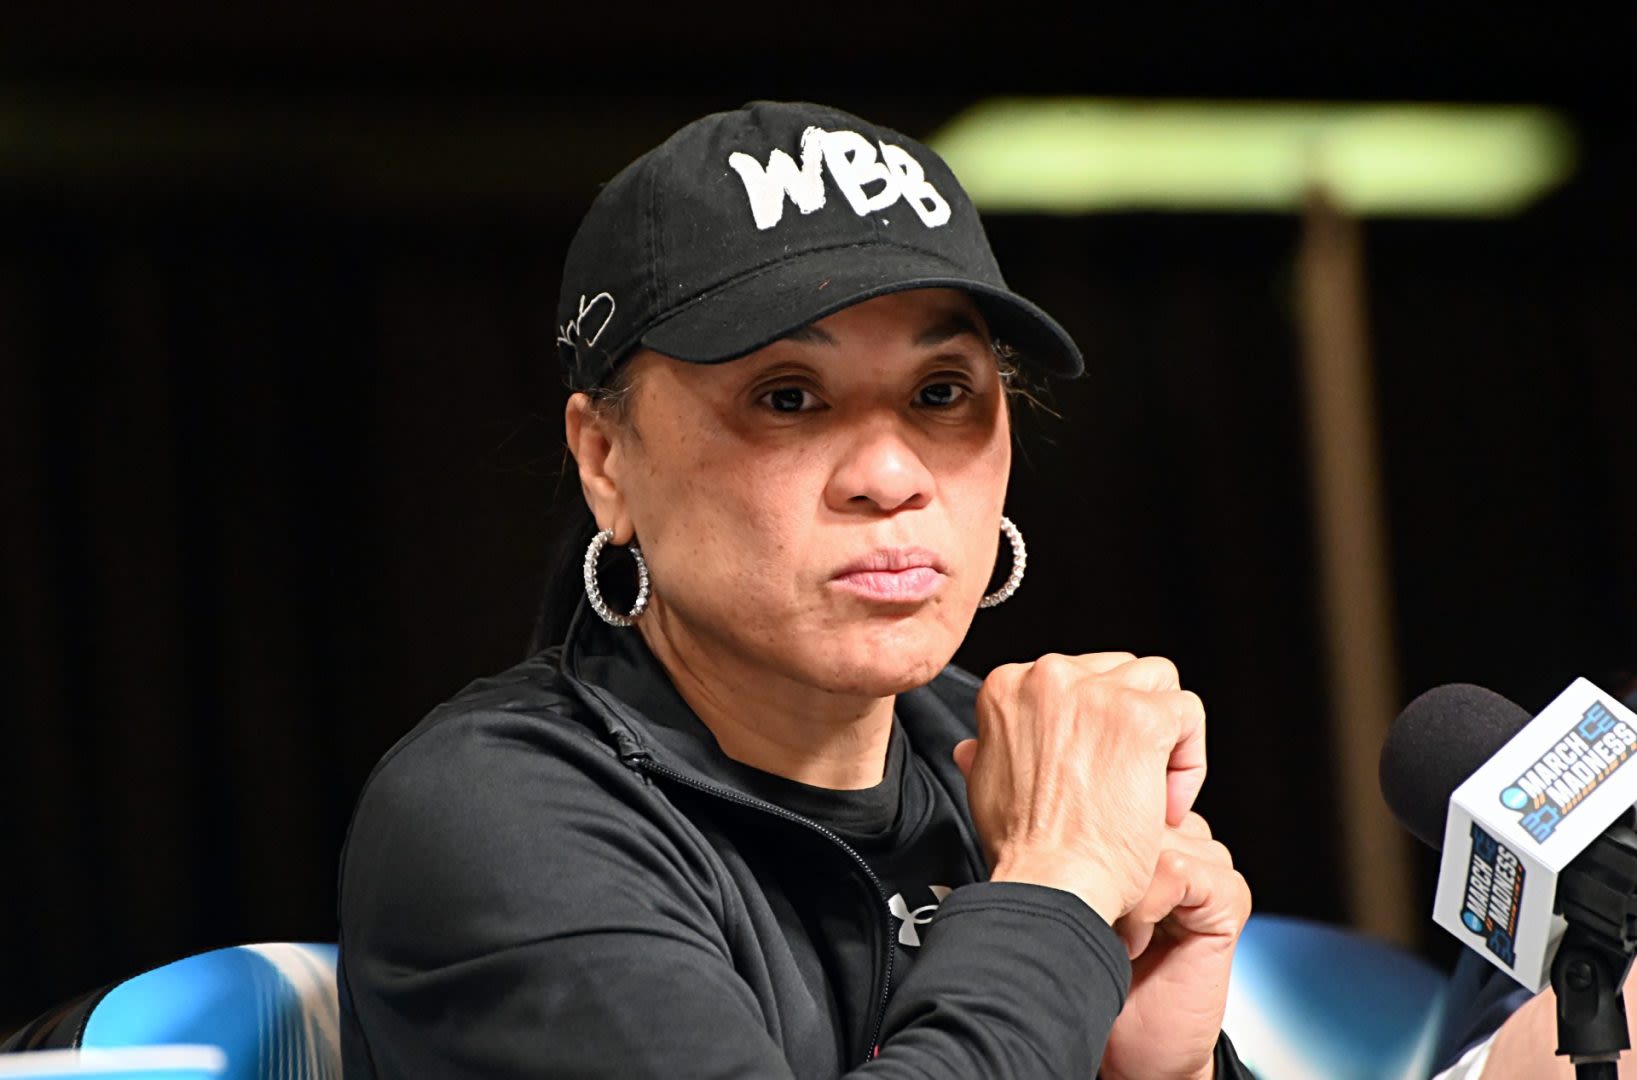 Dawn Staley is breaking Barriers and empowering women